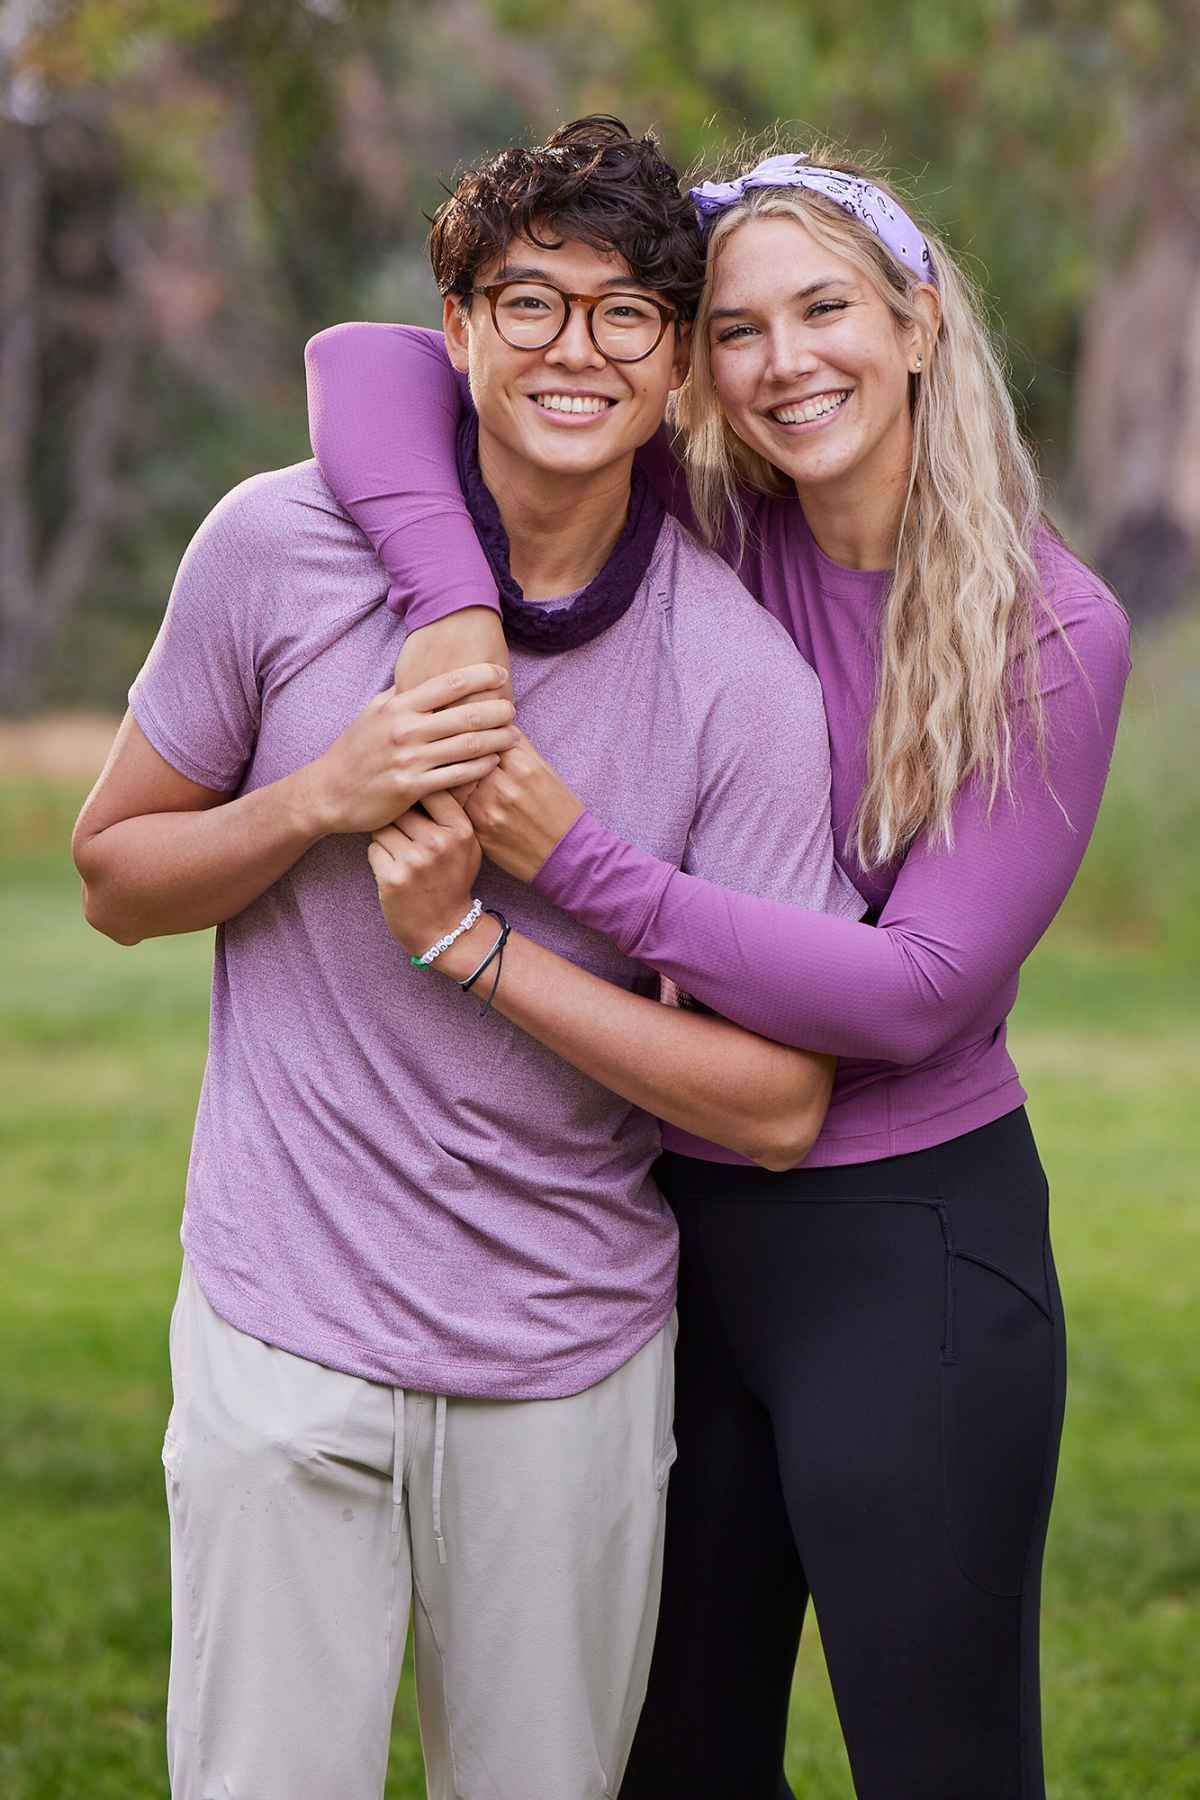 How Big Brother's Derek and Claire Prepared for 'The Amazing Race'